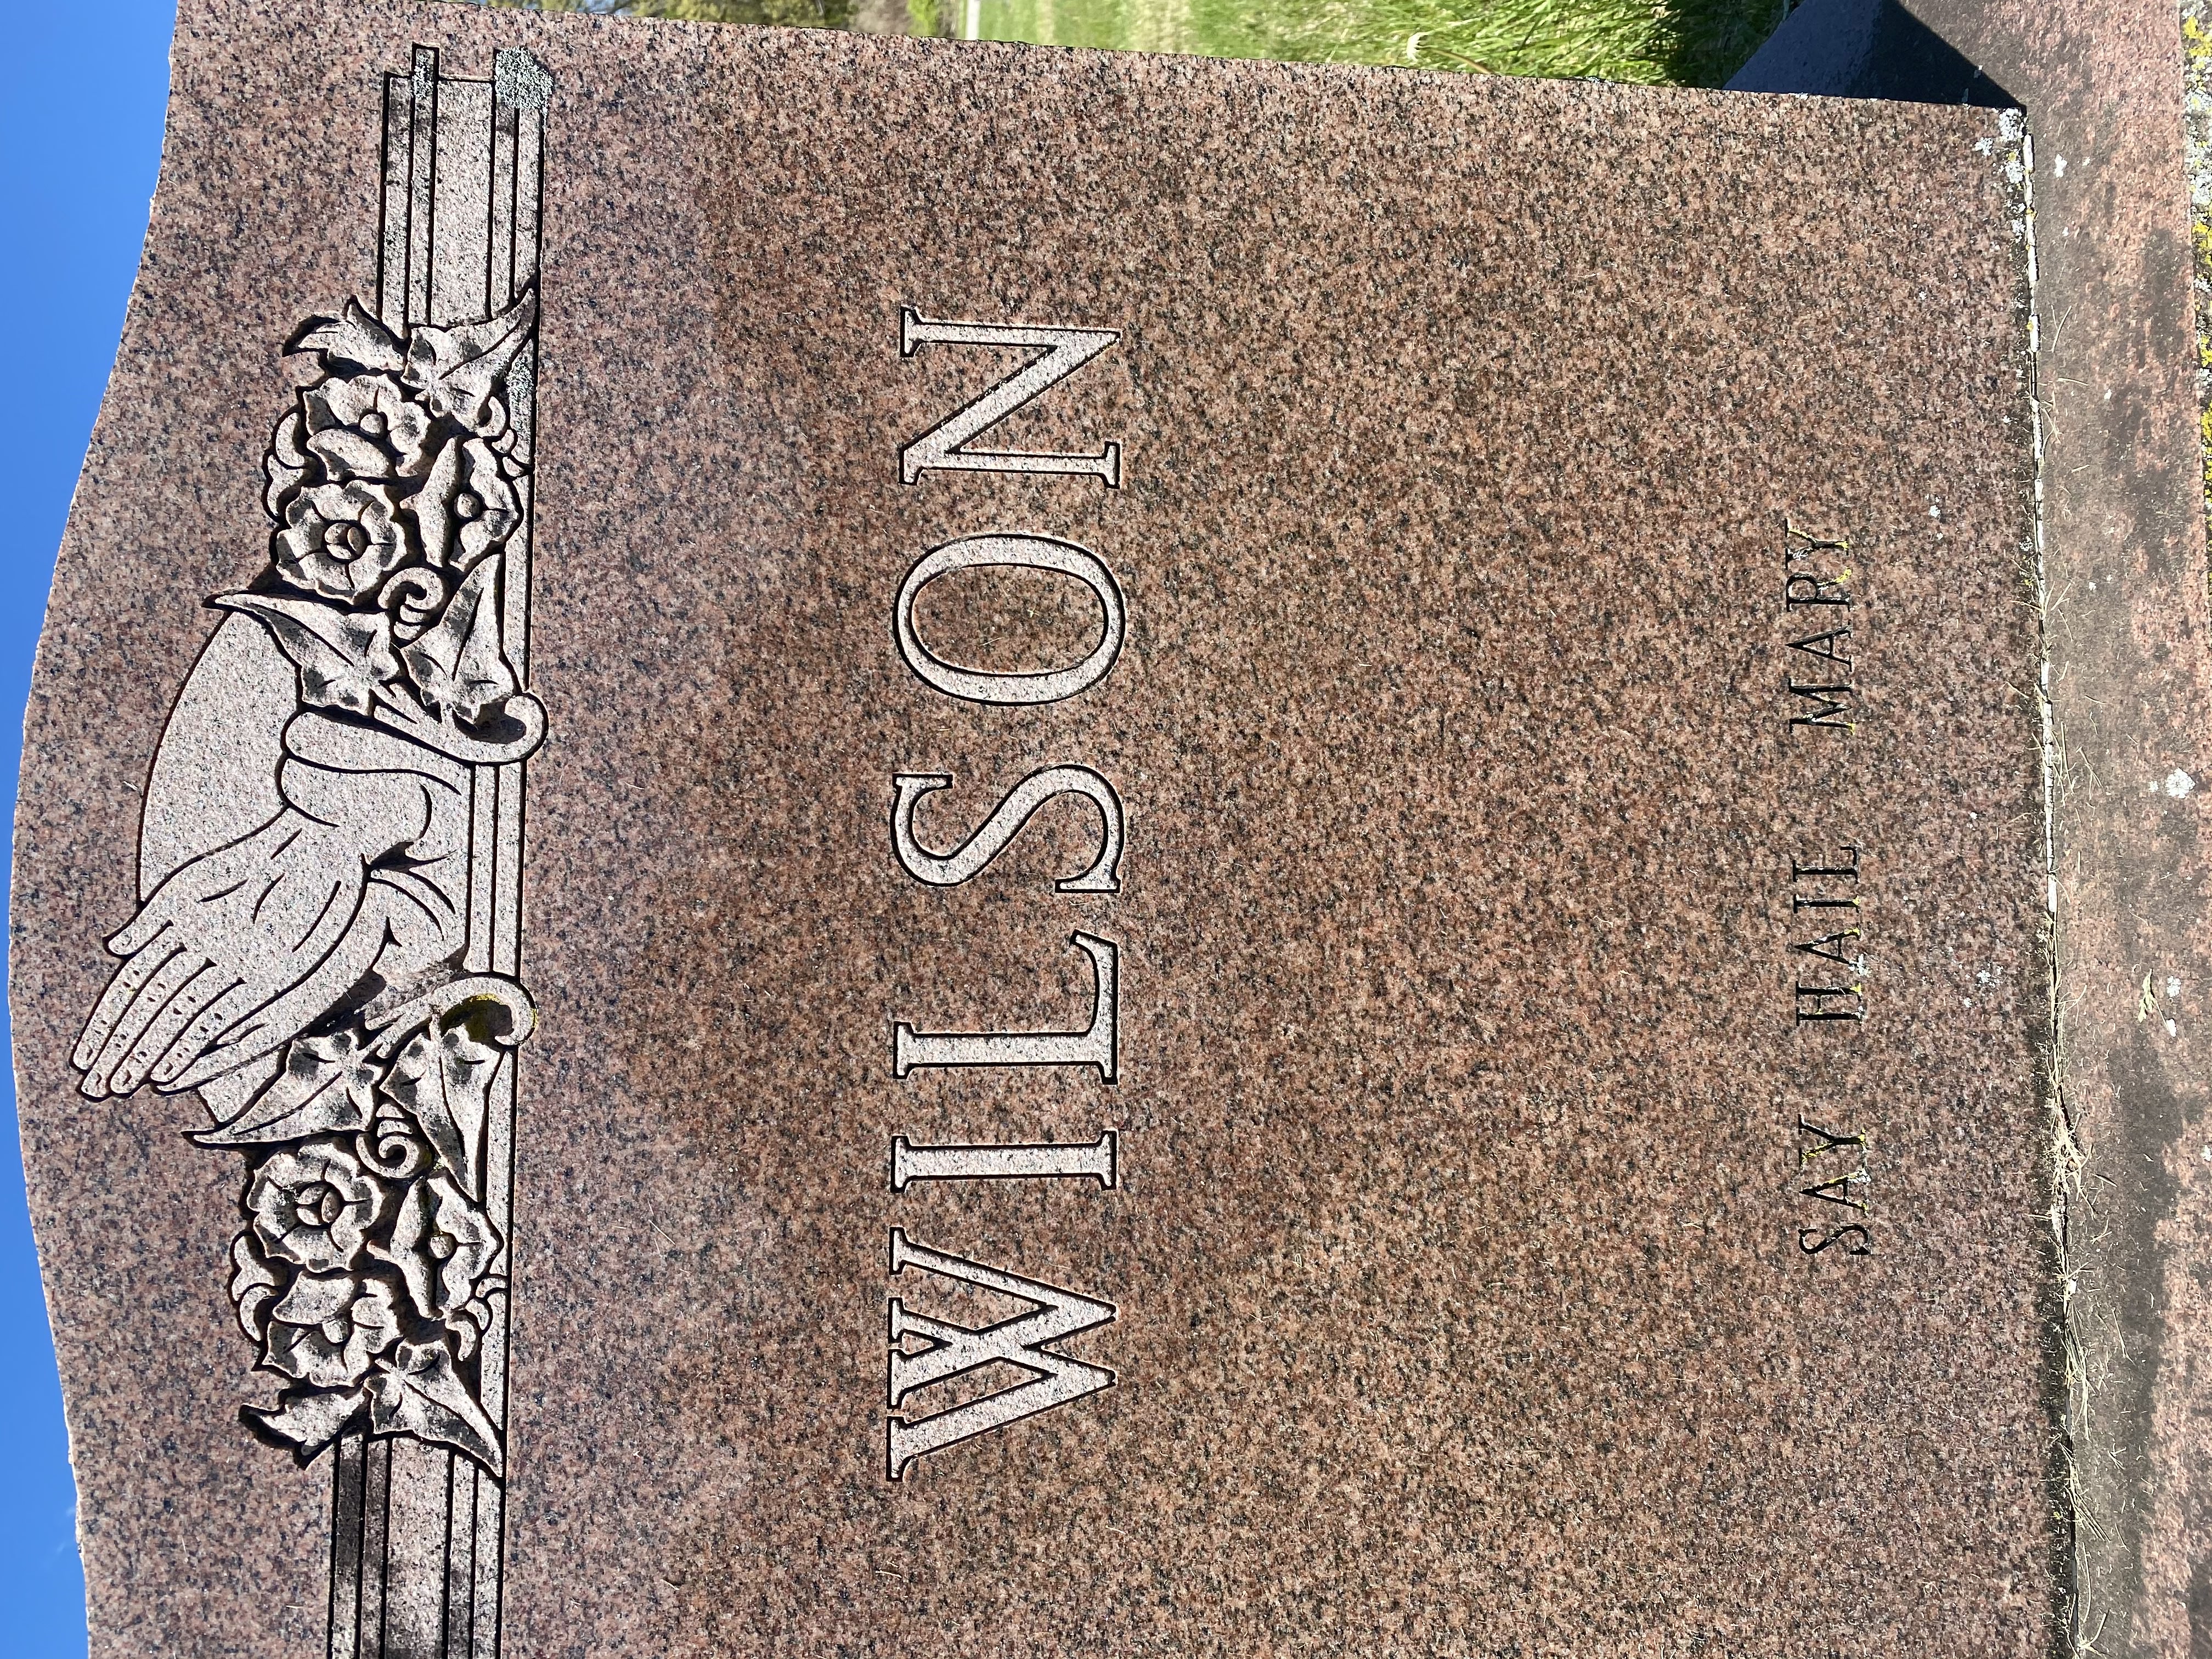 Other Side of Marie Rose's Grave, Inscribed Wilson, Say Hail Mary with hands praying surrounded by flowers